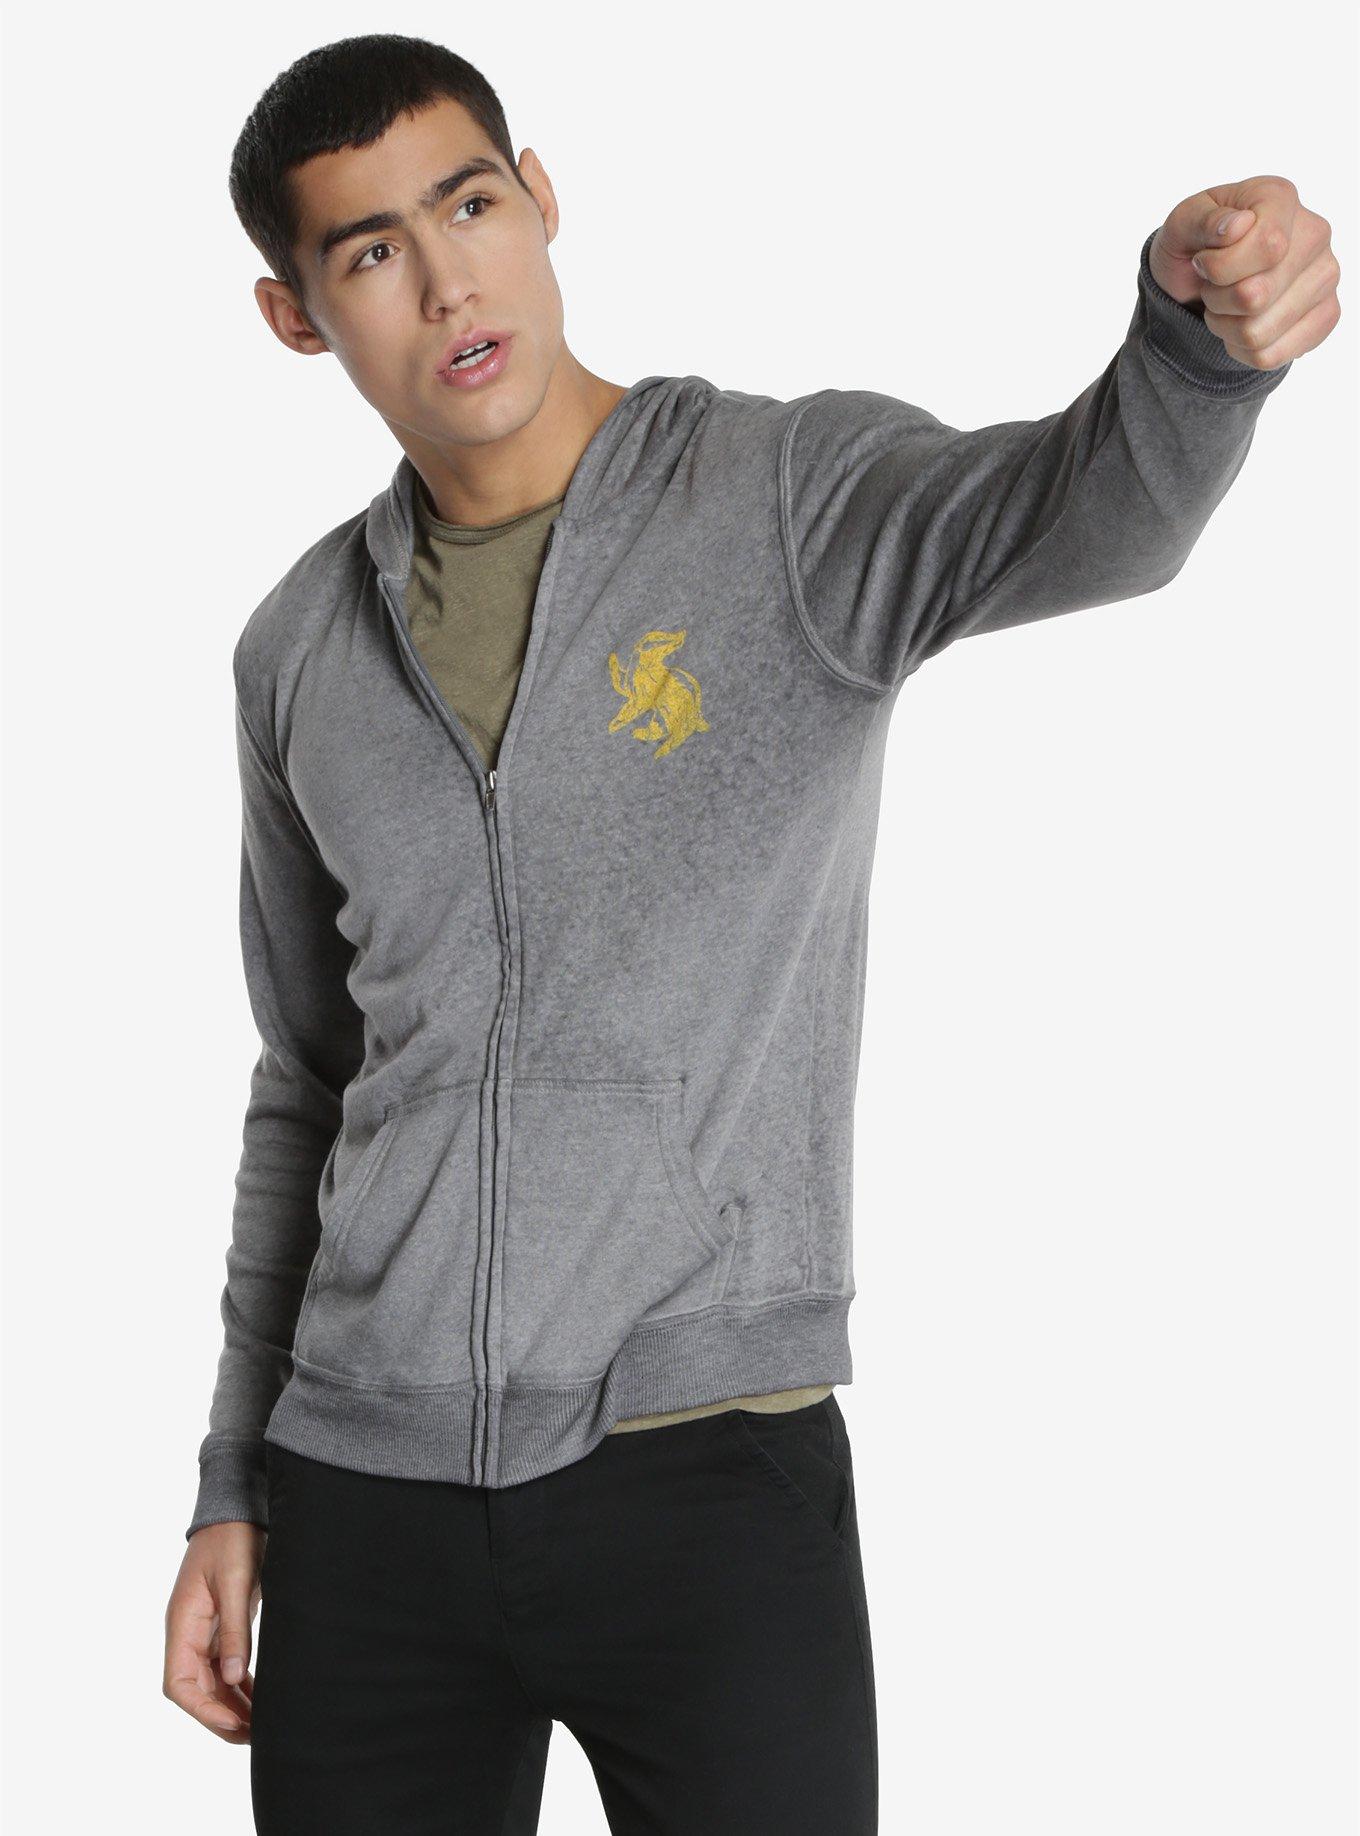 Harry Potter Hufflepuff Quidditch Captain Hoodie, GREY, hi-res